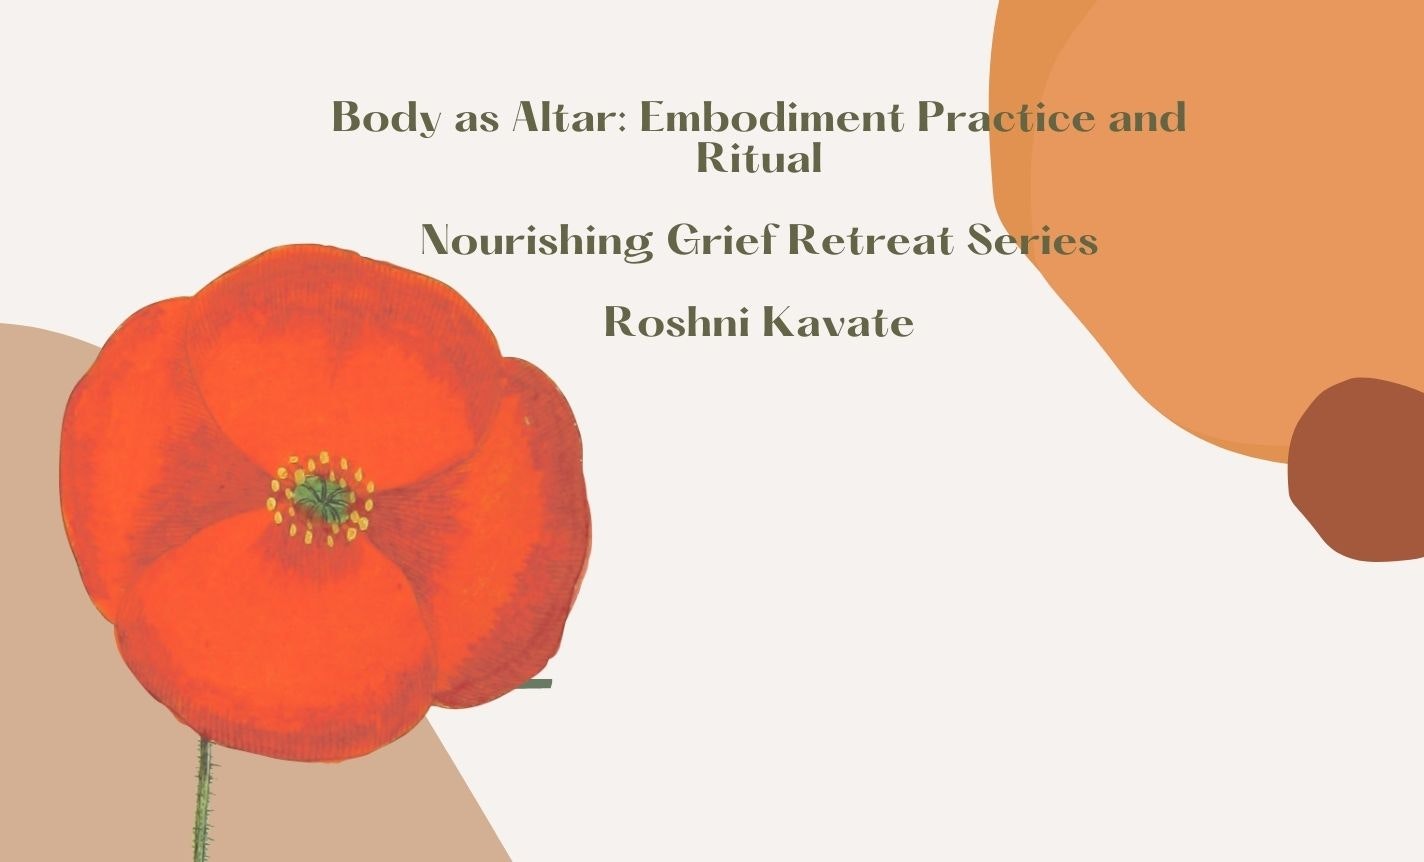 Body as Altar: Embodiment Practice and Ritual